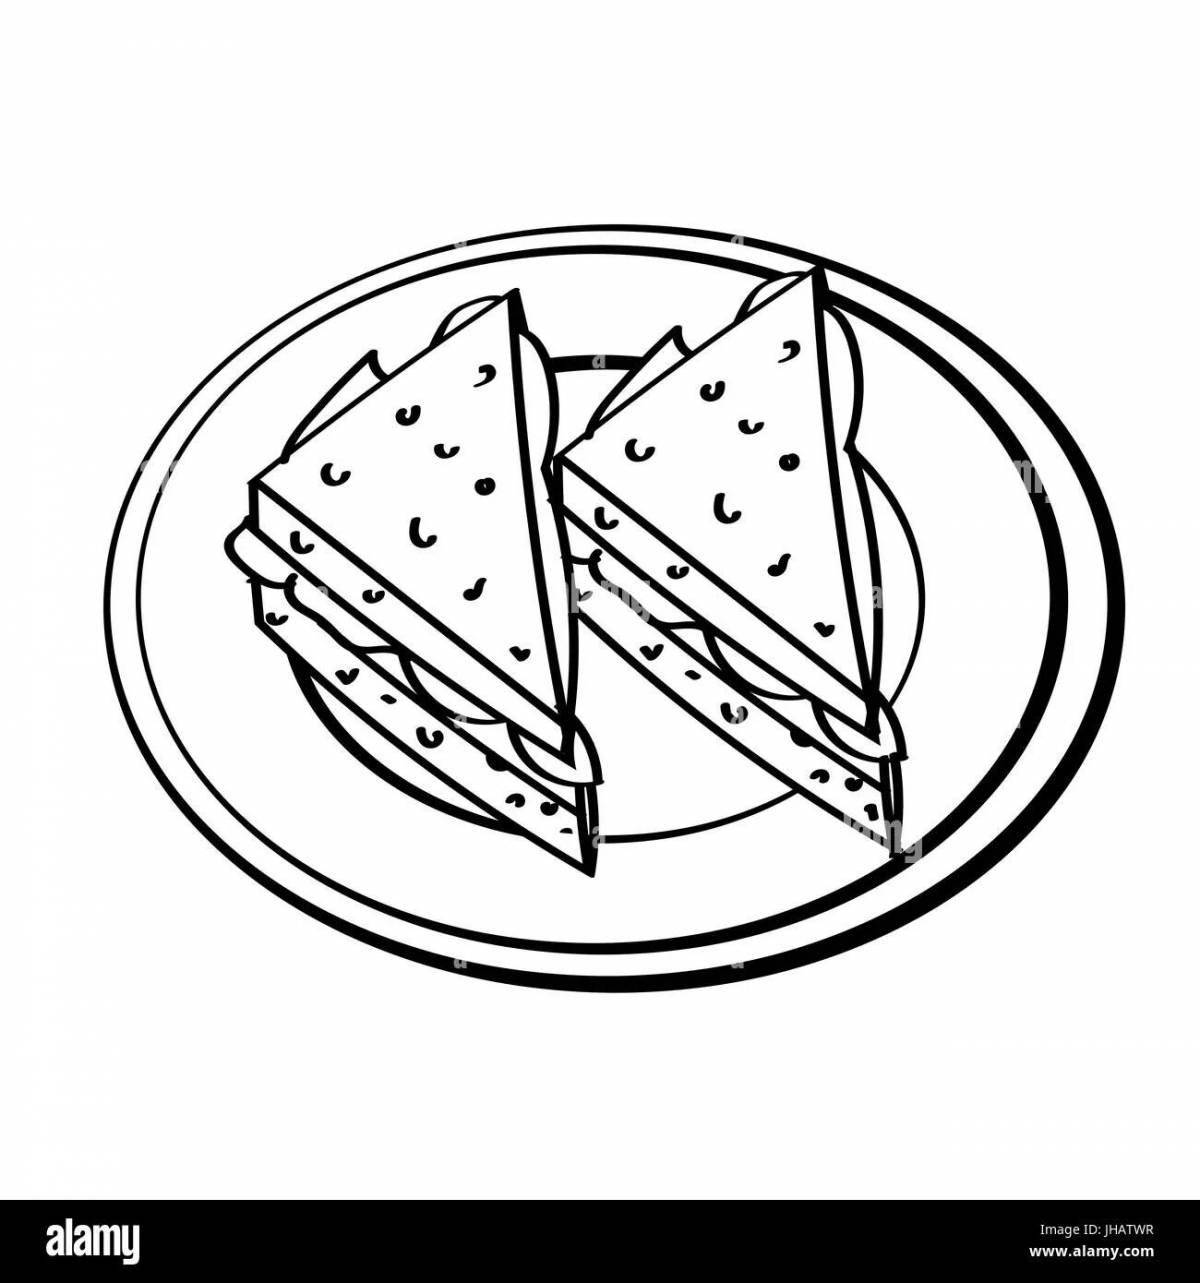 Animated sandwich coloring page for kids